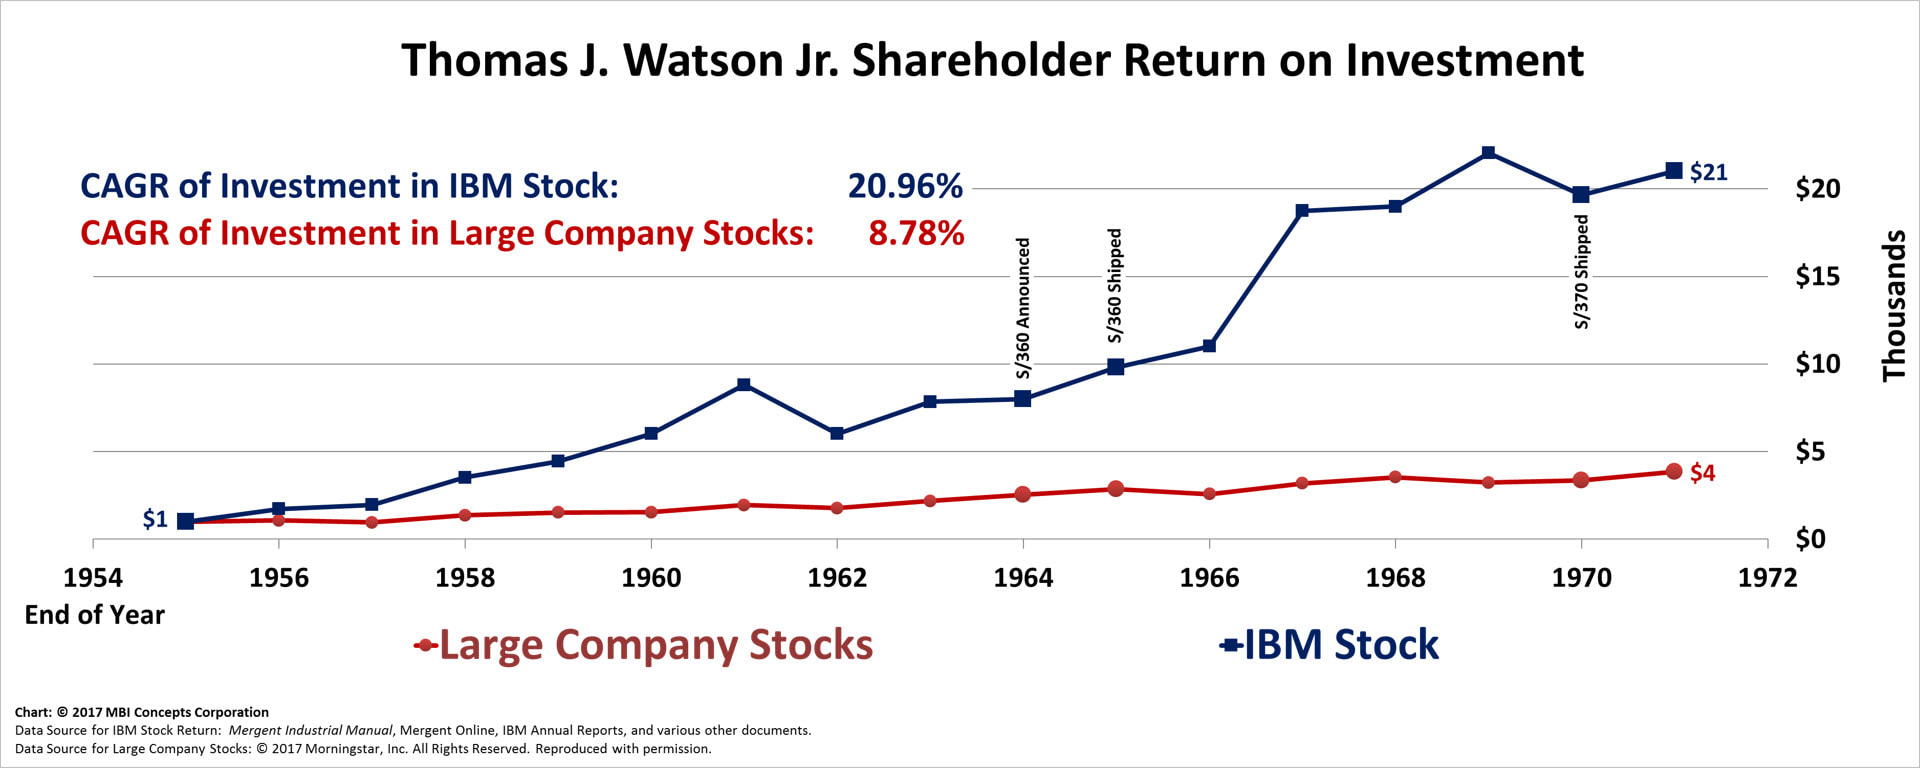 A line graph showing Thomas J. Watson Jr.'s Shareholder Return on Investment in comparison to a large-company stock index fund from 1955 through 1971.